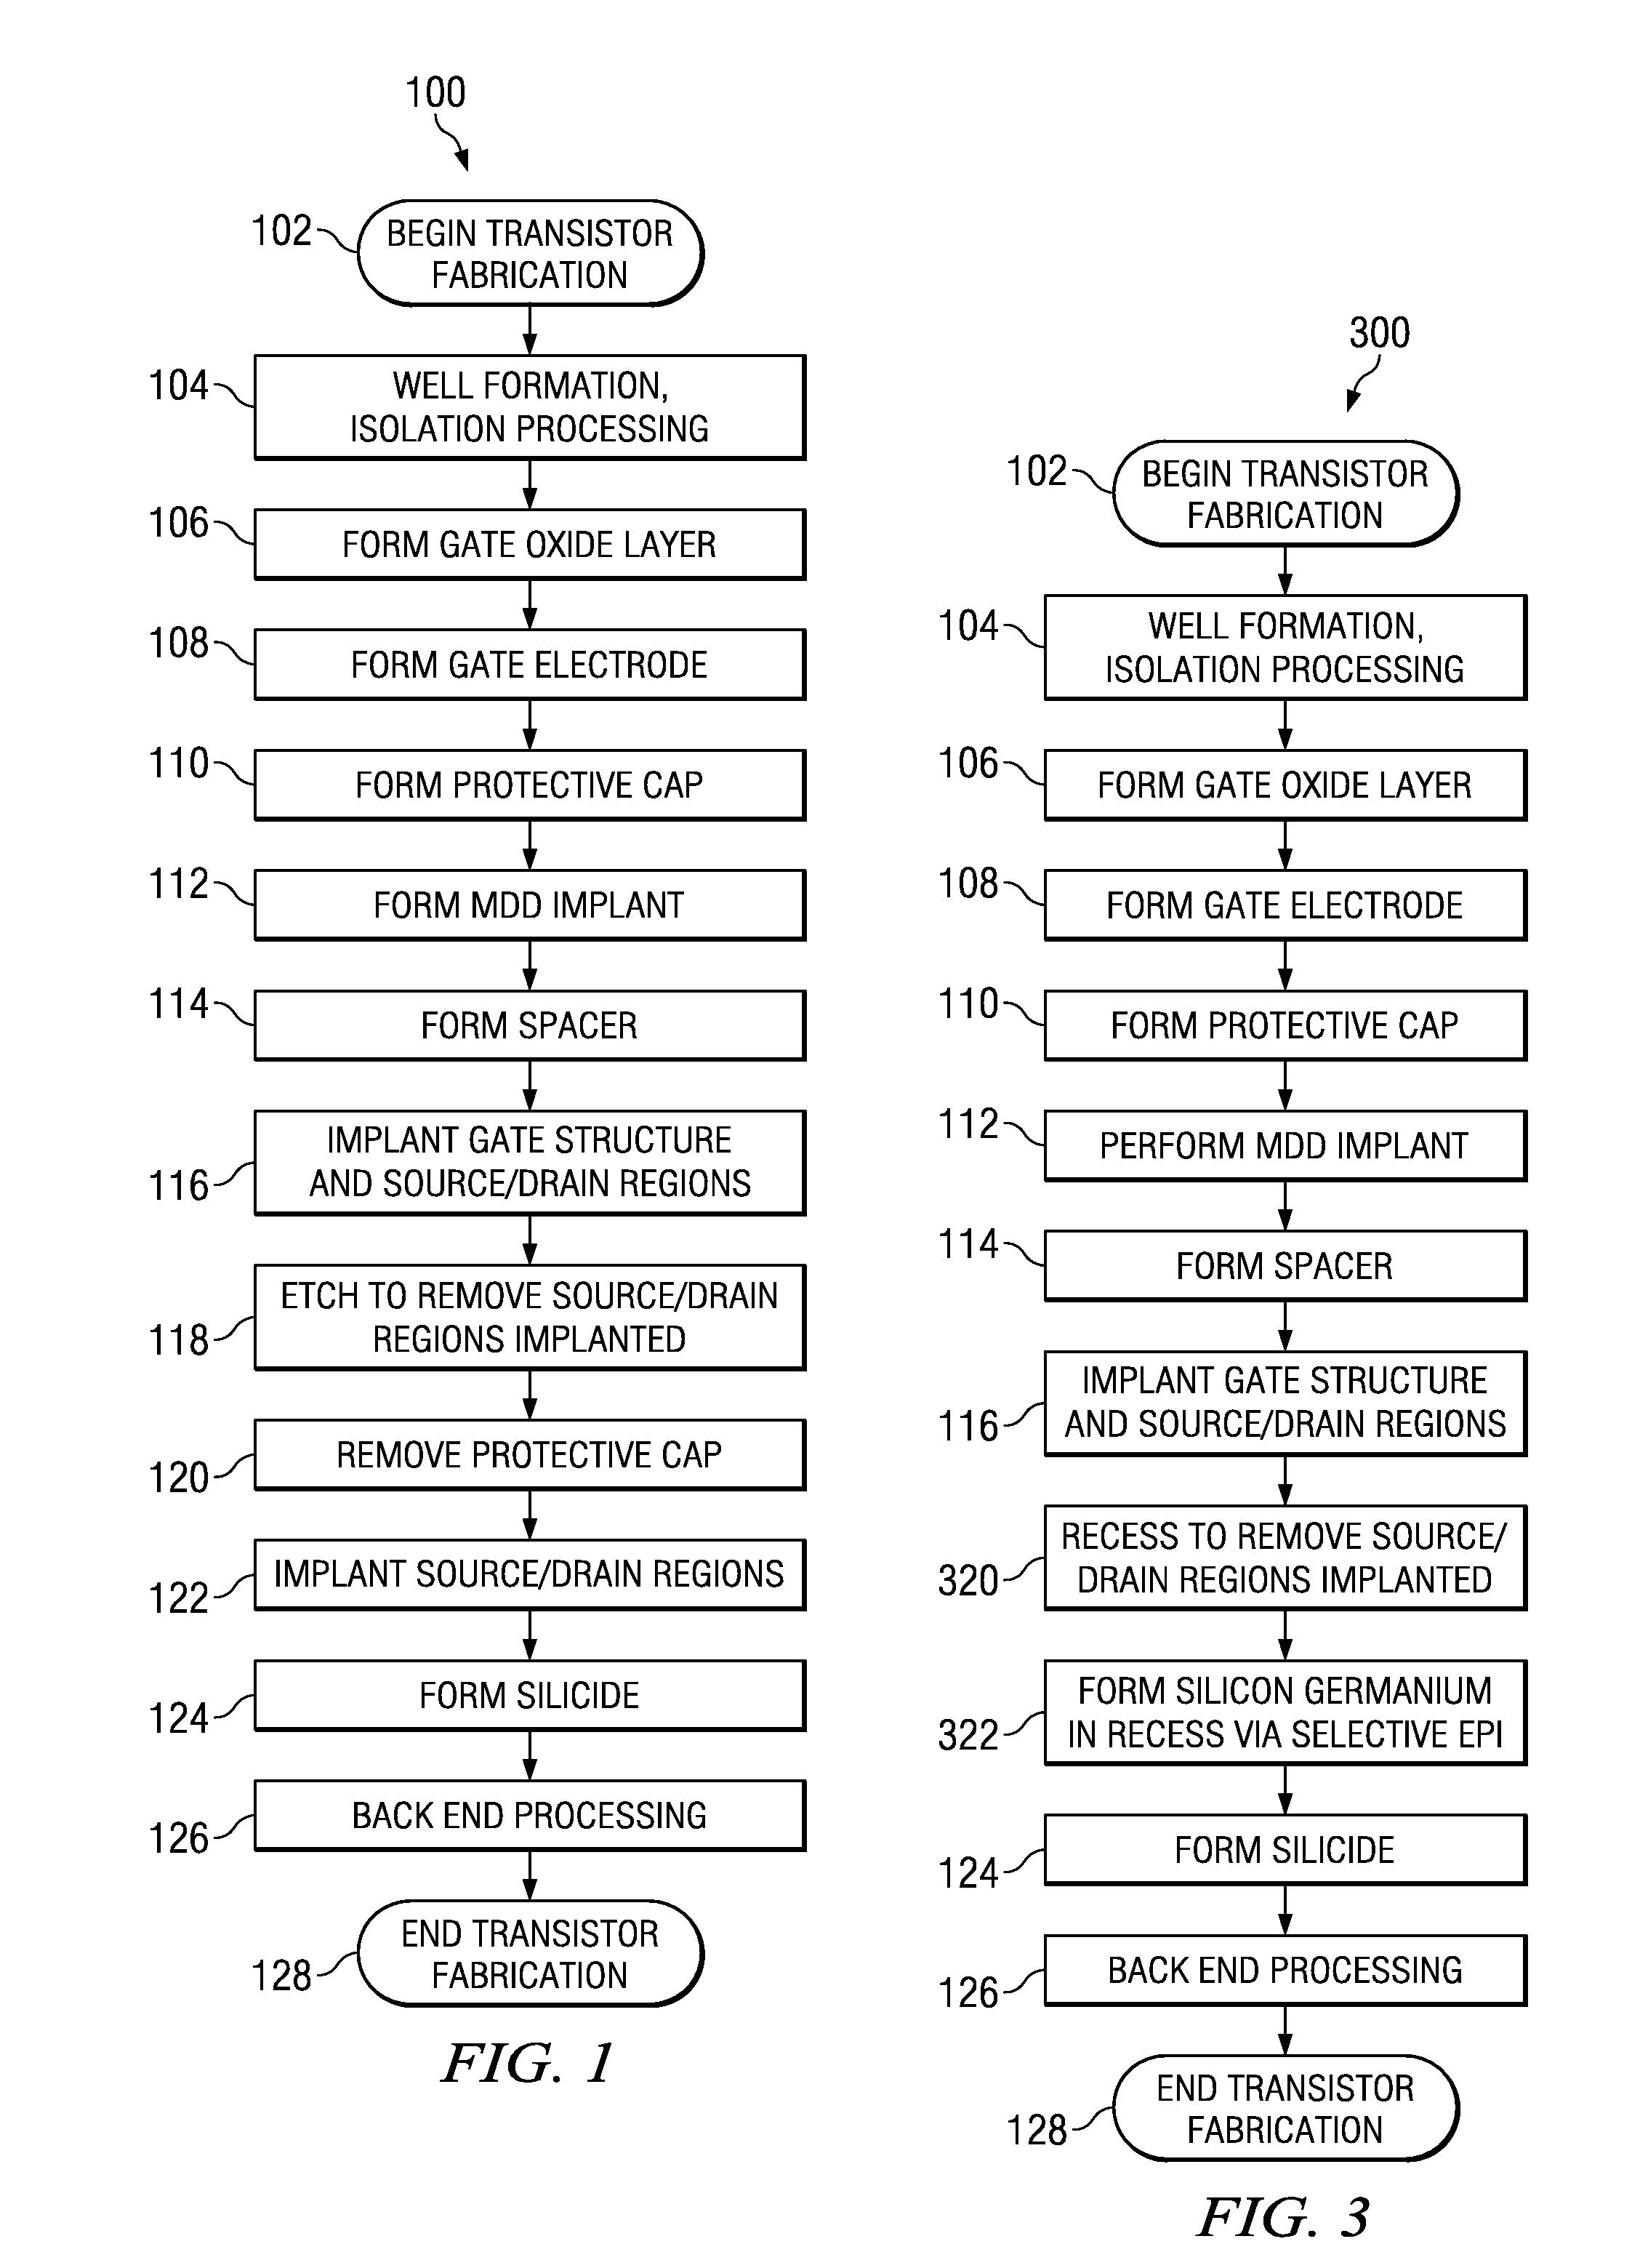 Method to improve transistor tox using si recessing with no additional masking steps